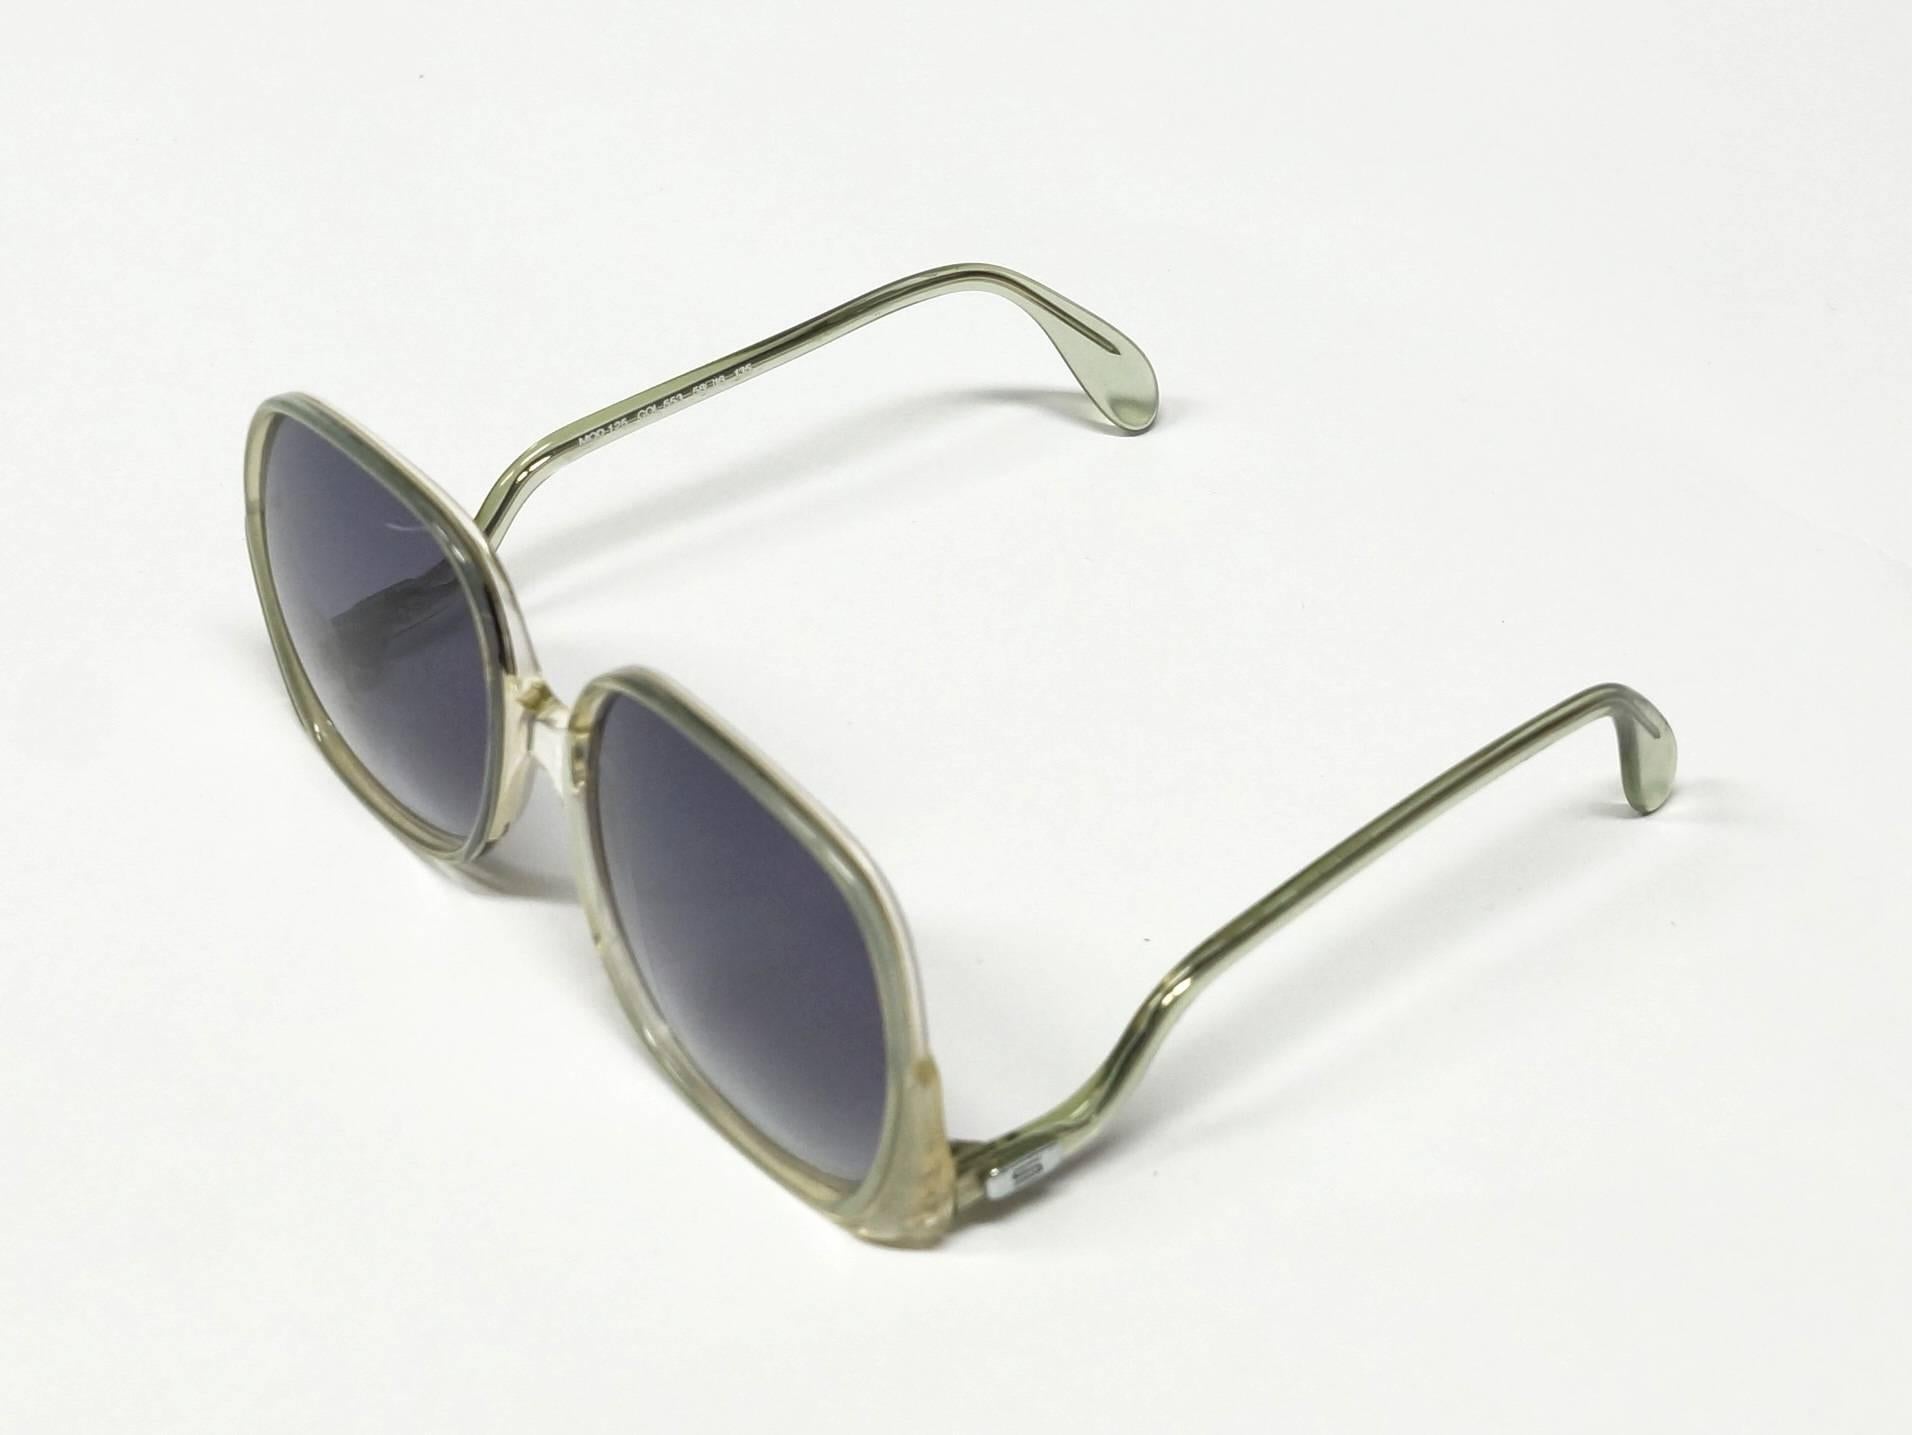 Women's 1970s Silhouette Oversized Sunglasses with Drop Temples For Sale